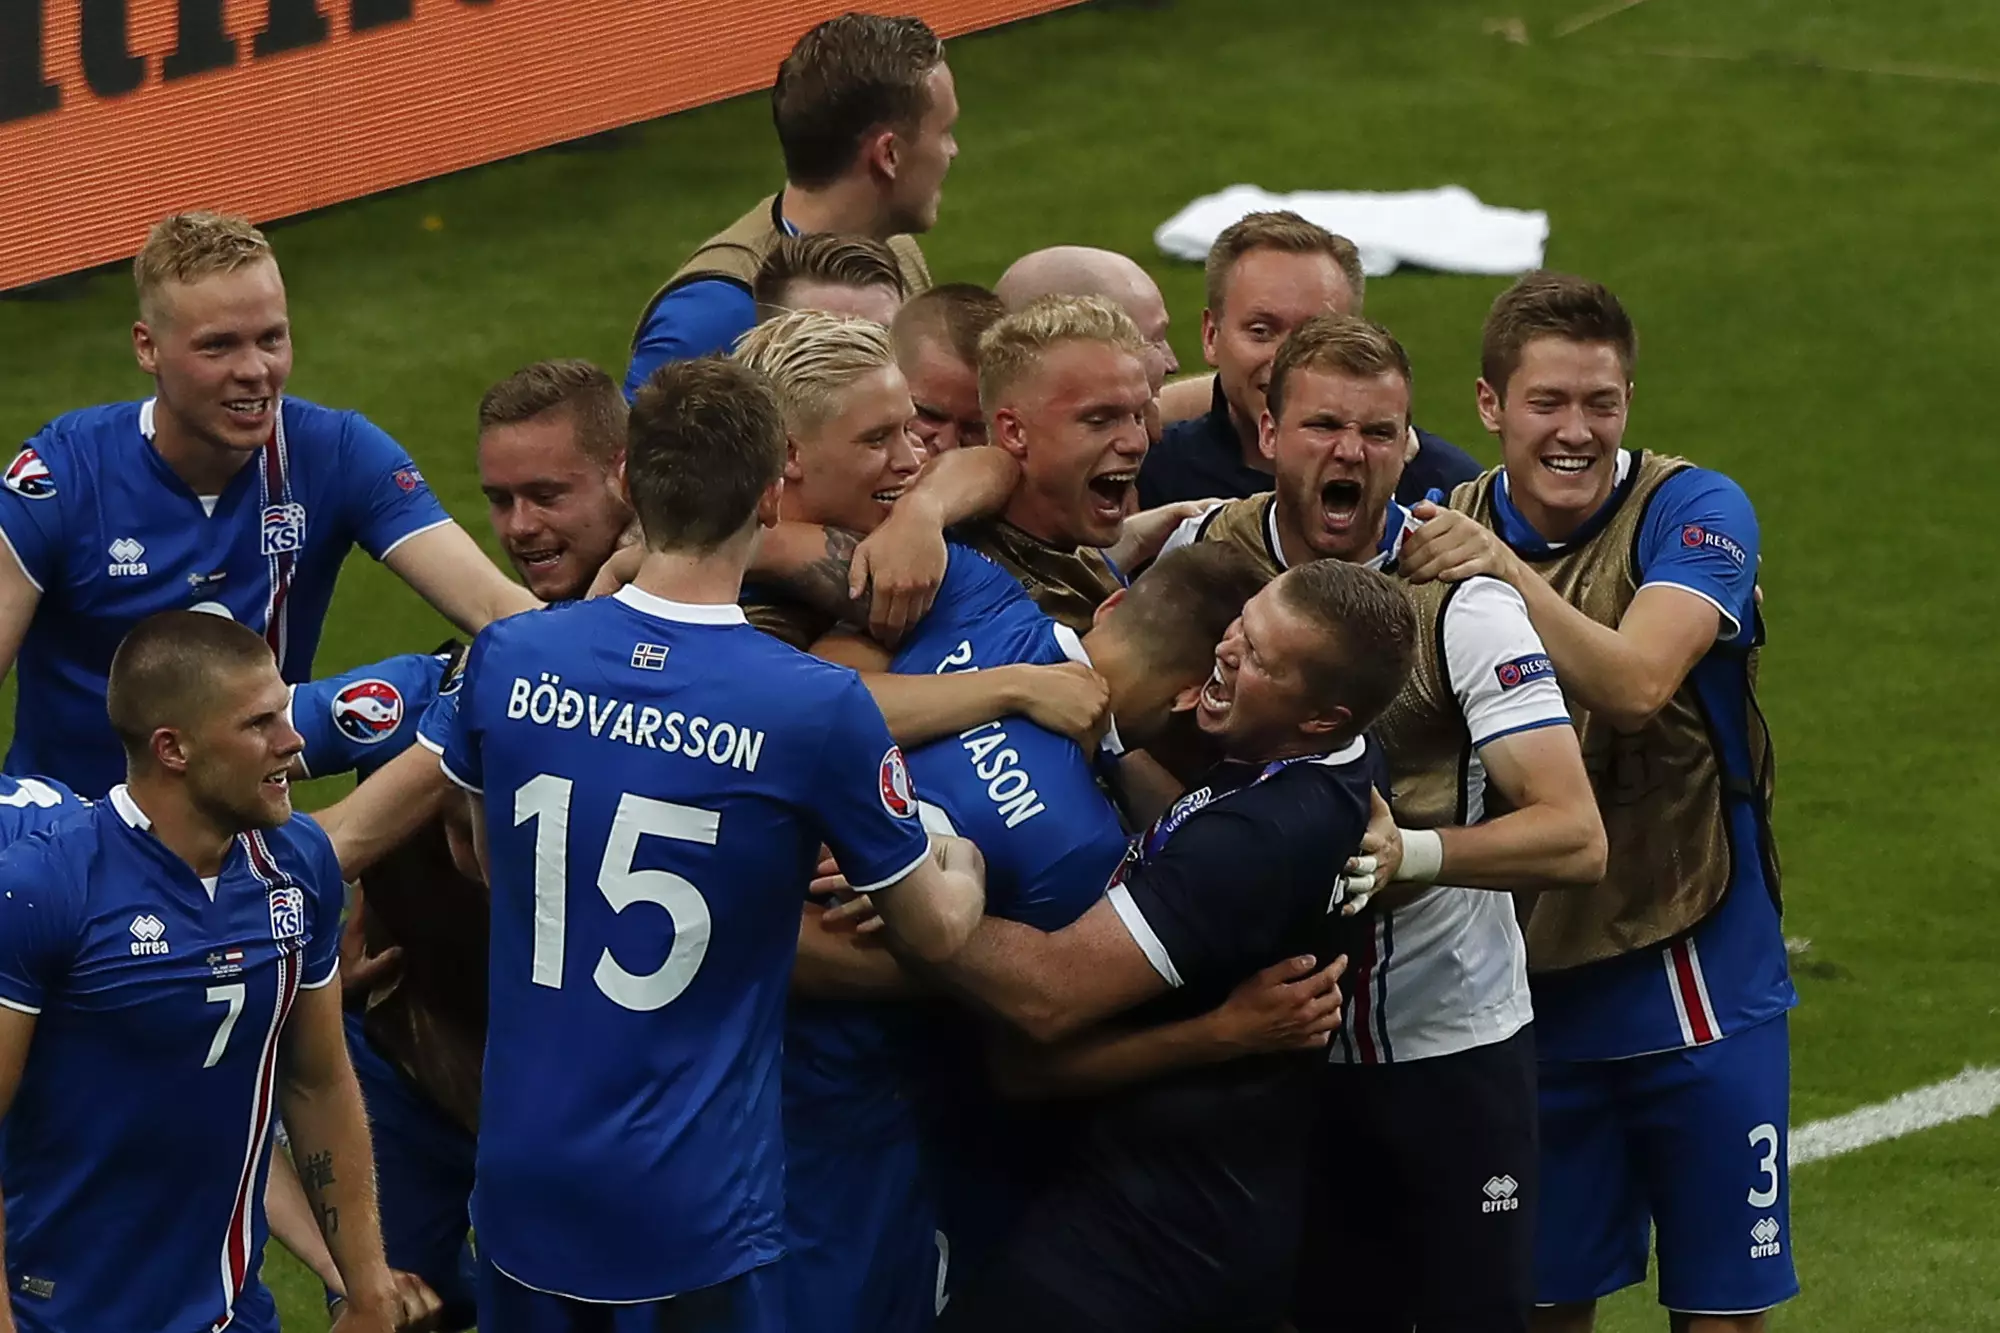 WATCH: Iceland Commentators Go Absolutely Crazy After Last-Gasp Goal